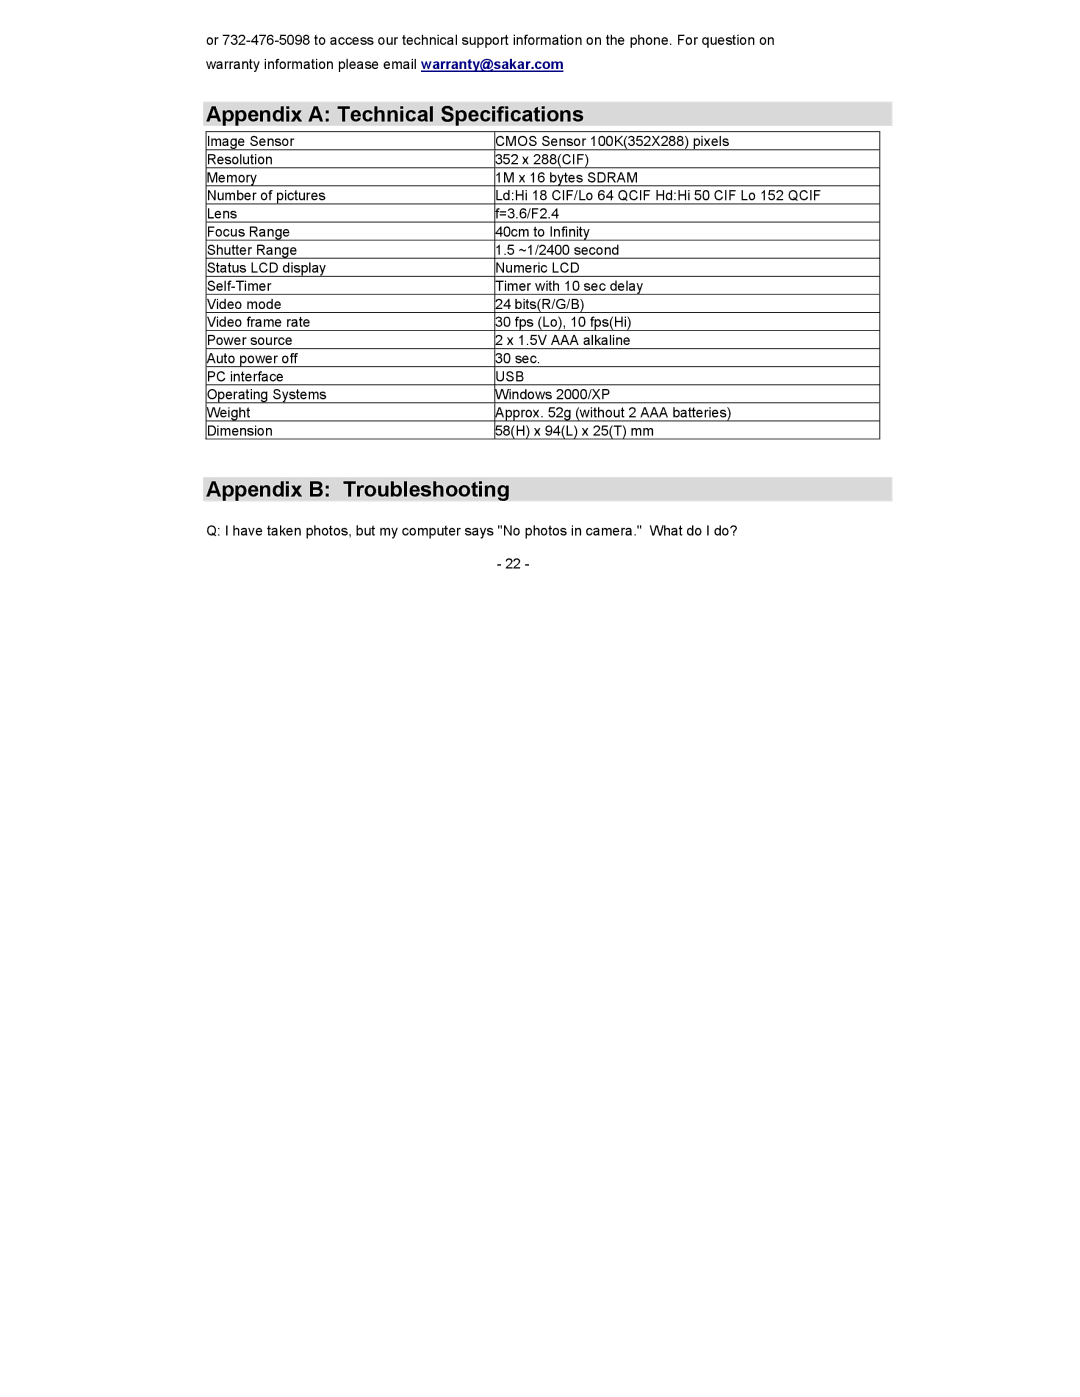 Sakar 59097 owner manual Appendix a Technical Specifications, Appendix B Troubleshooting 